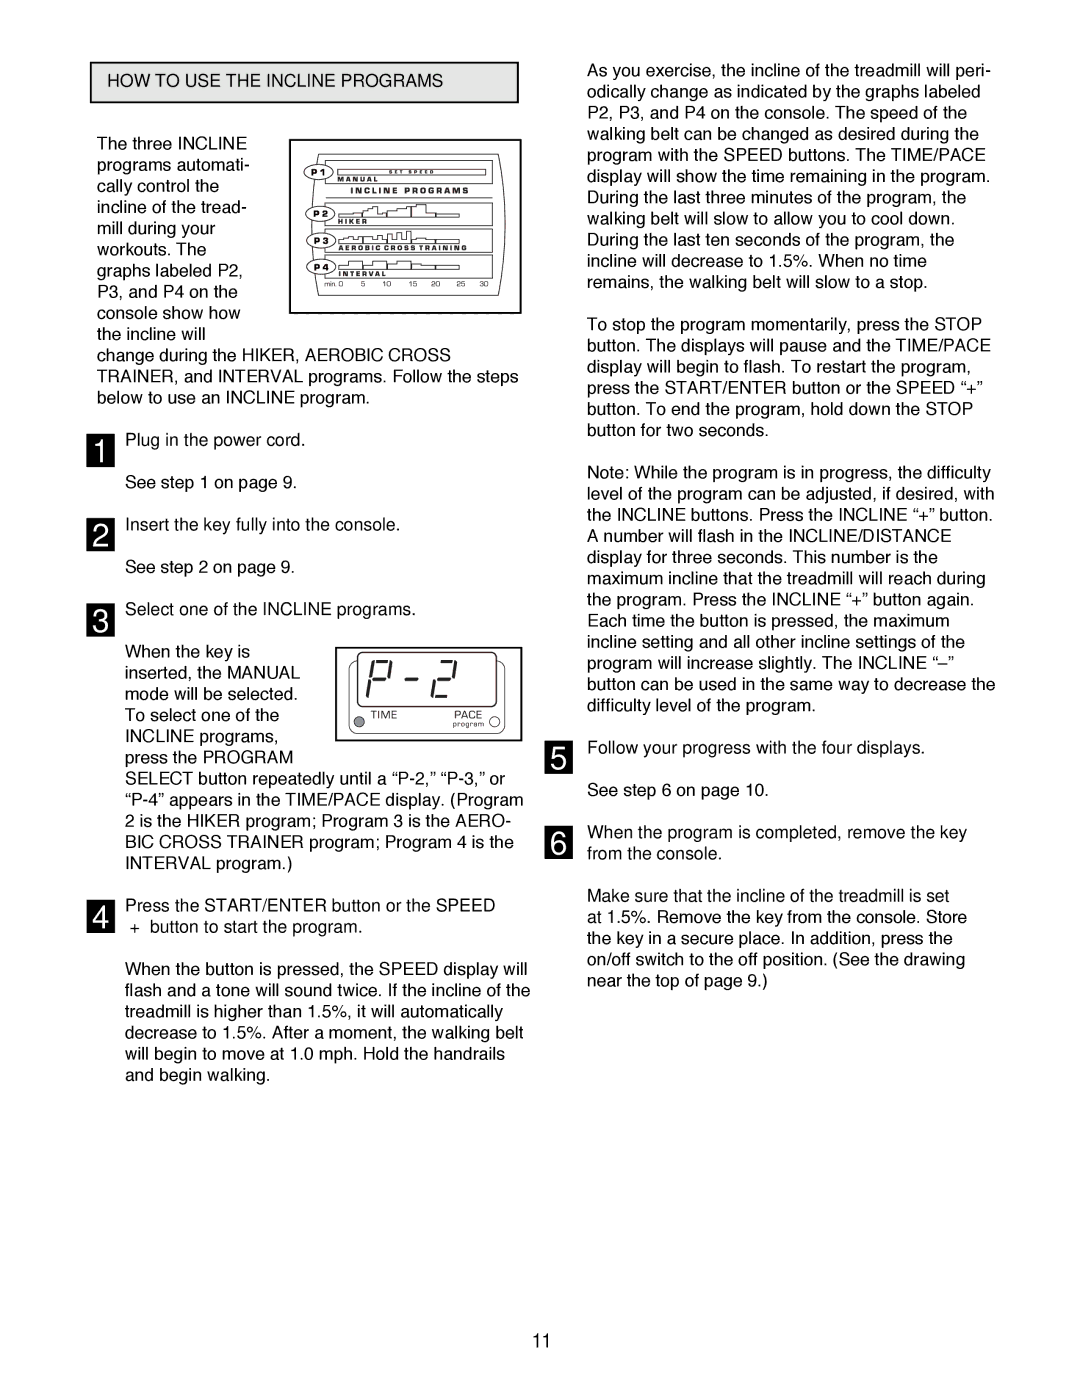 NordicTrack 1500 manual HOW to USE the Incline Programs, Select one of the Incline programs, From the console 